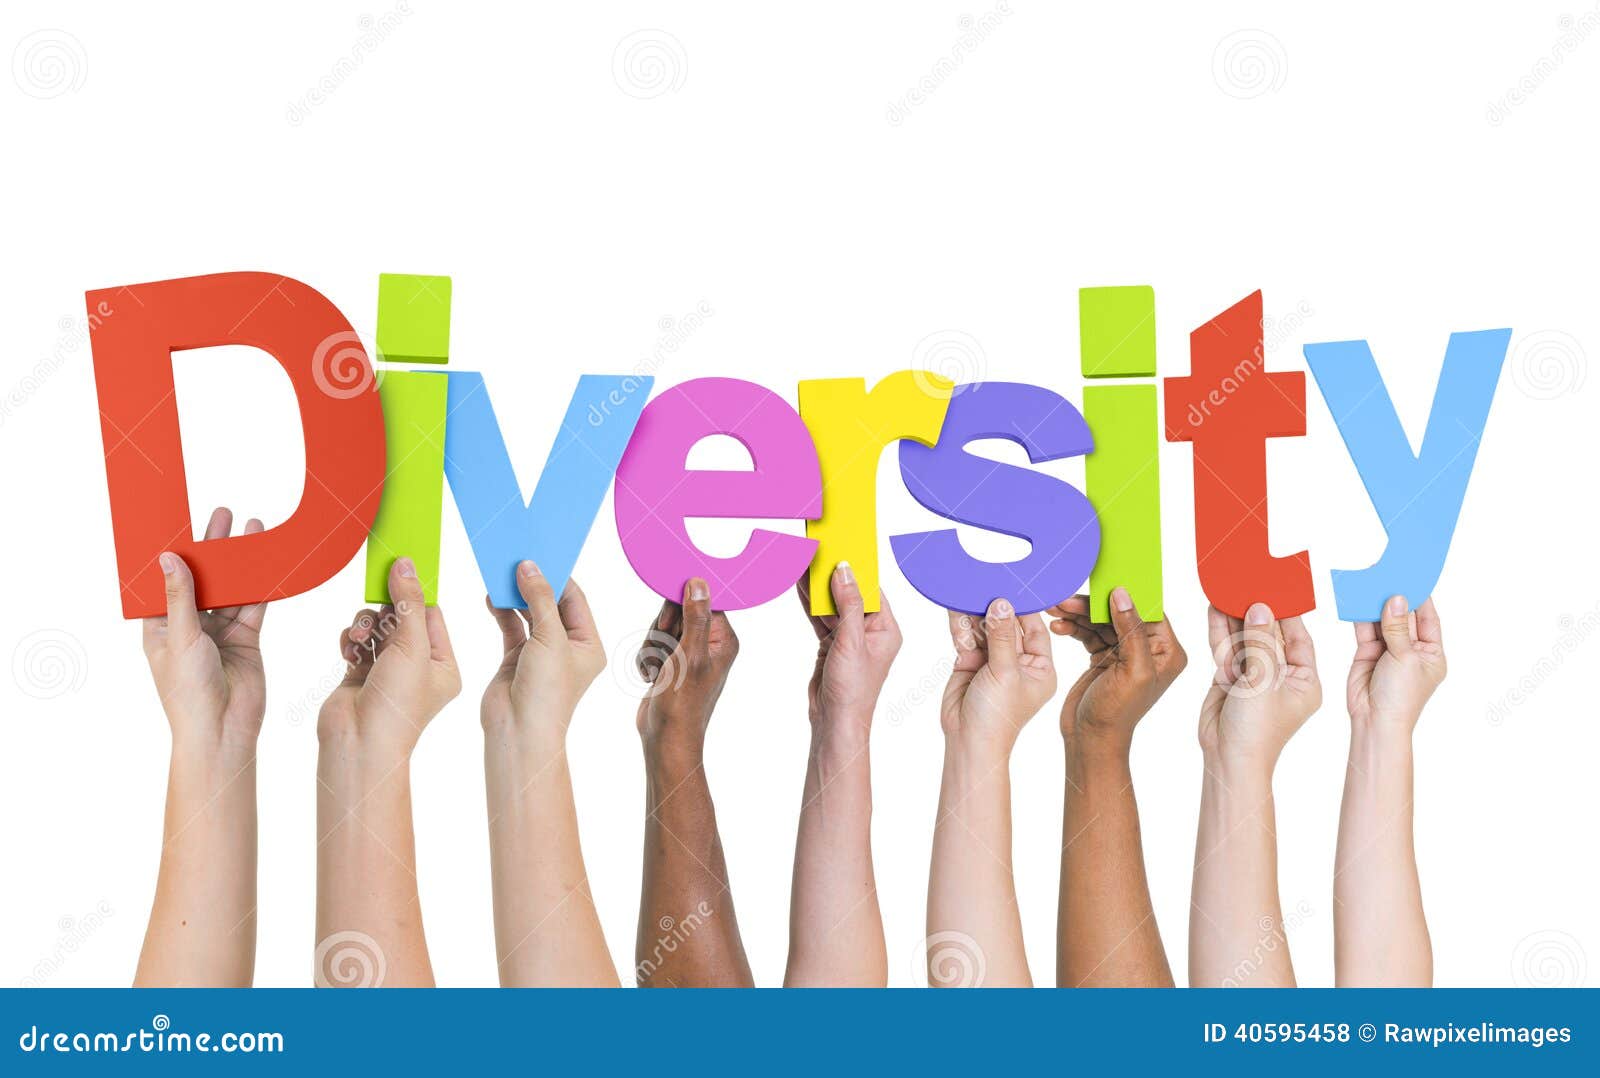 diverse hands holding the word diversity